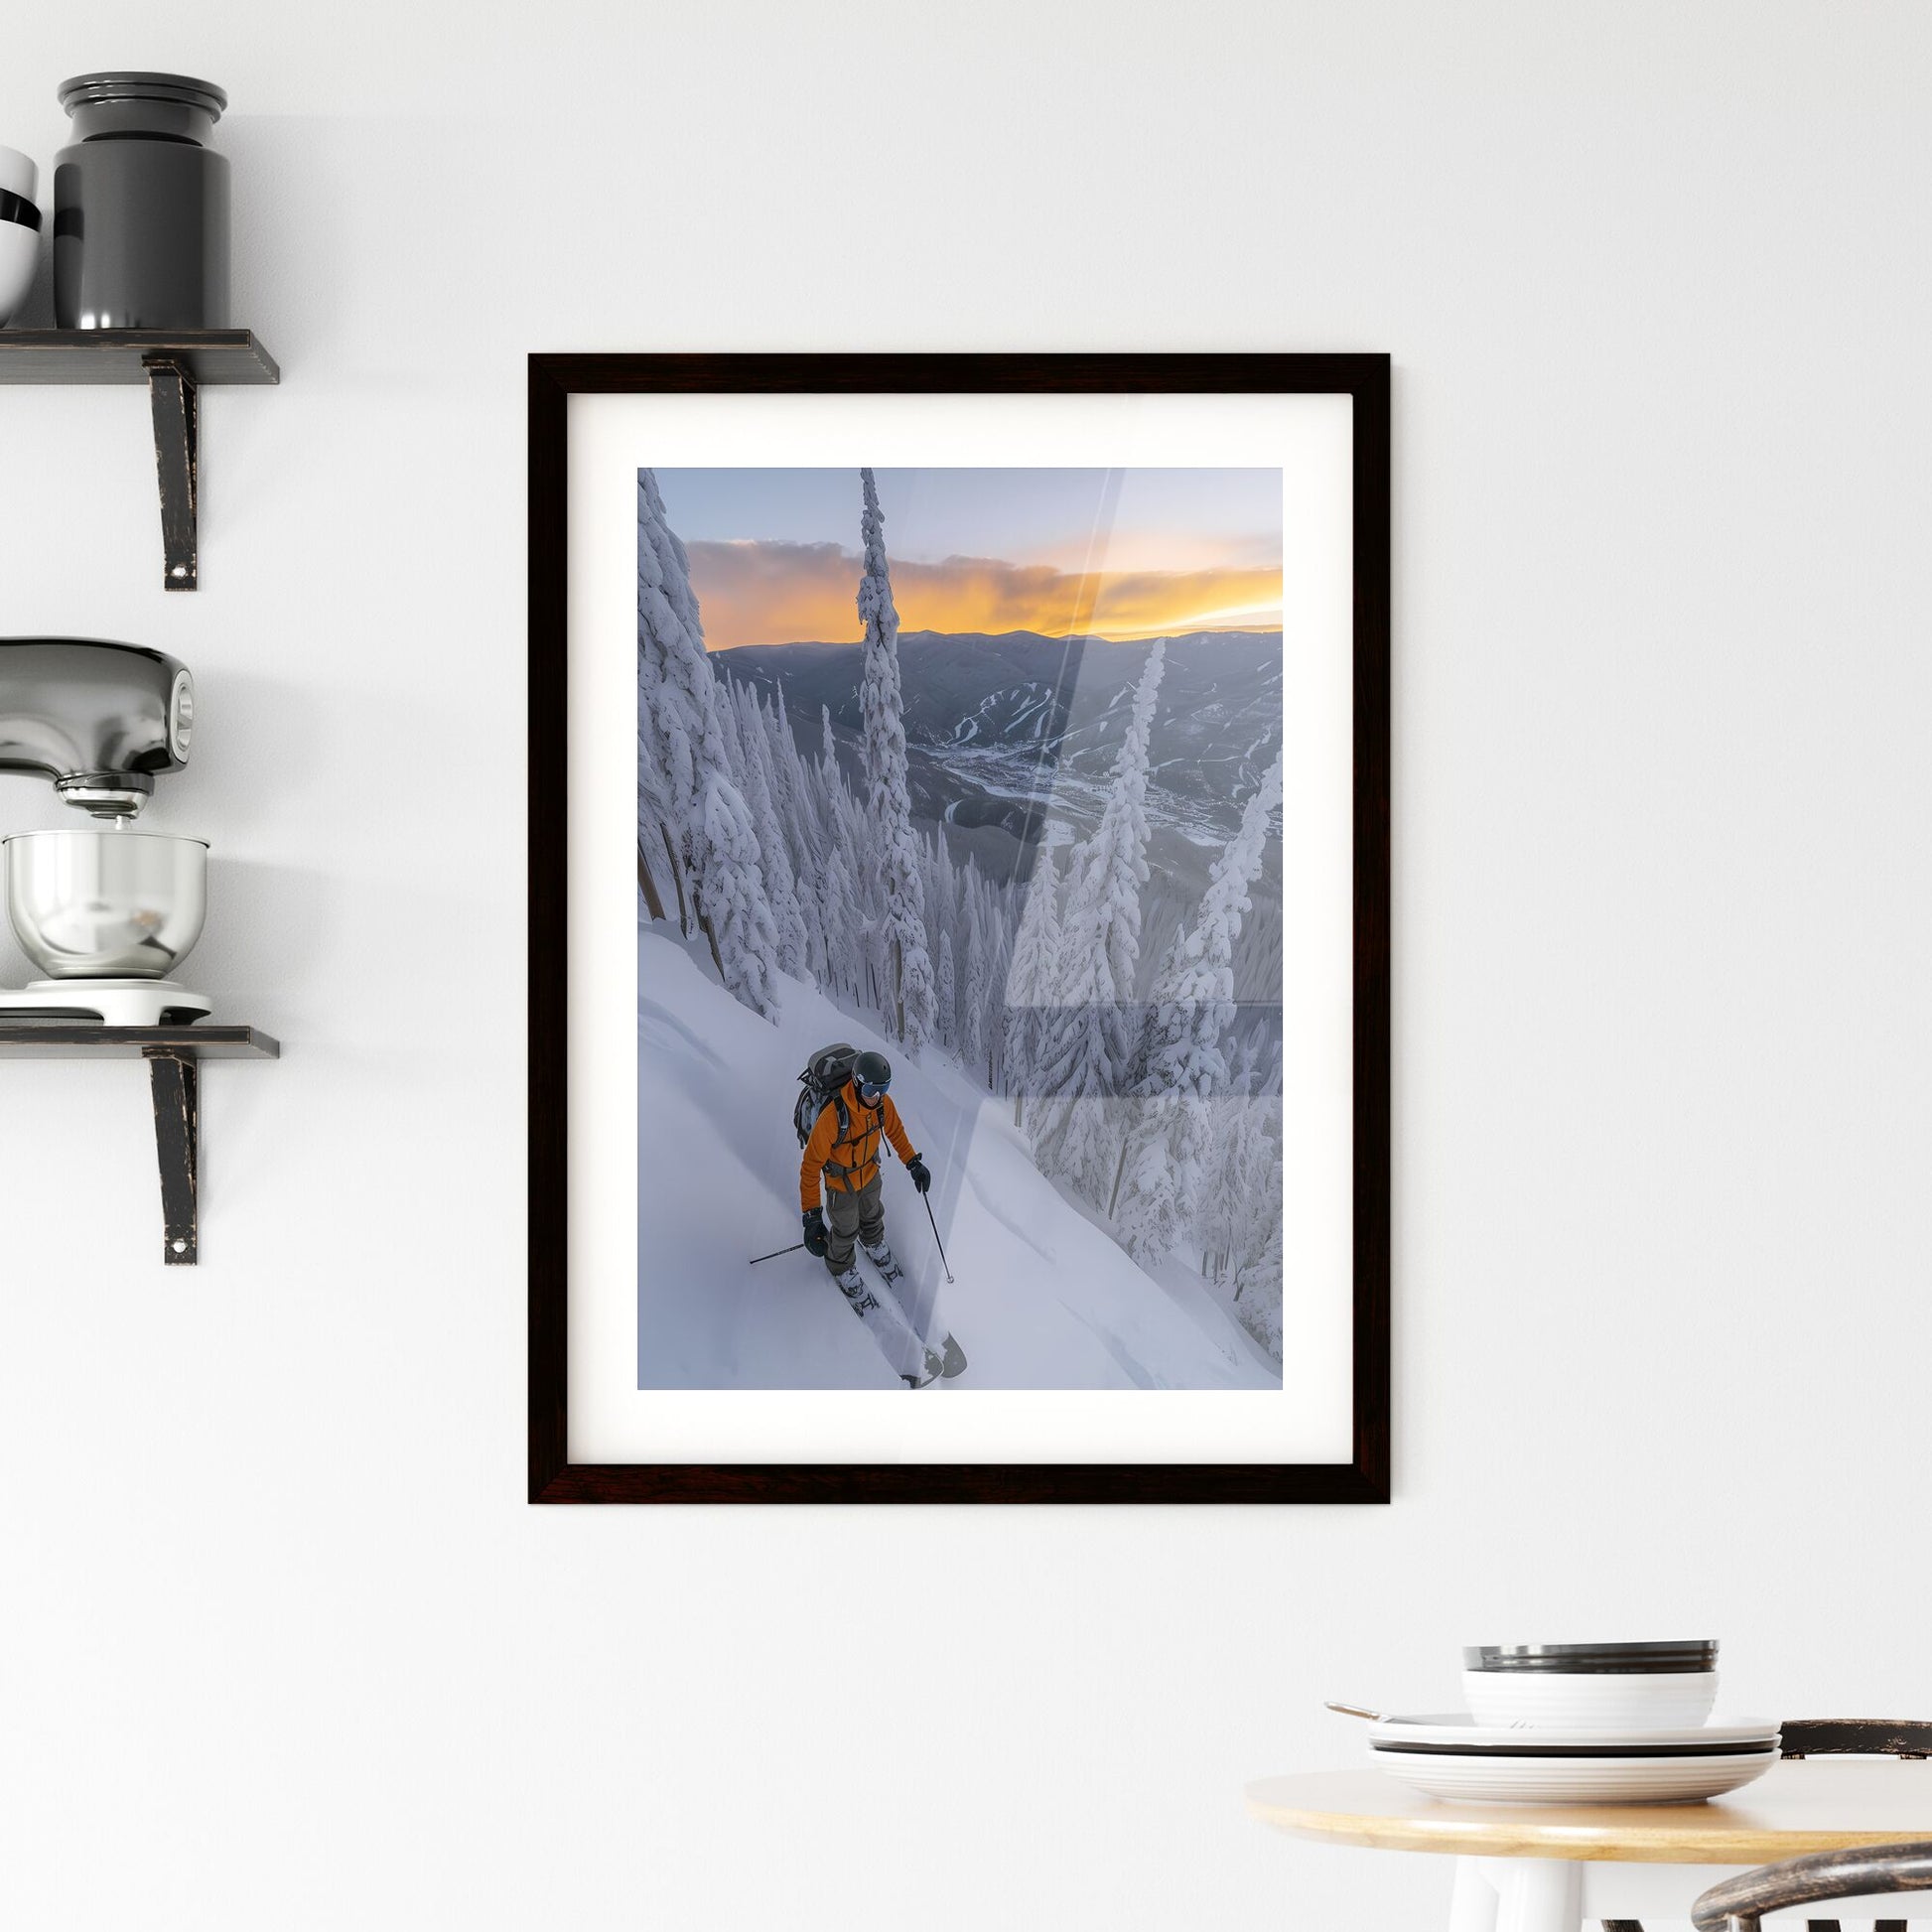 Snowboard snowboarding vail colorado snow flat design - Art print of a person skiing down a mountain Default Title